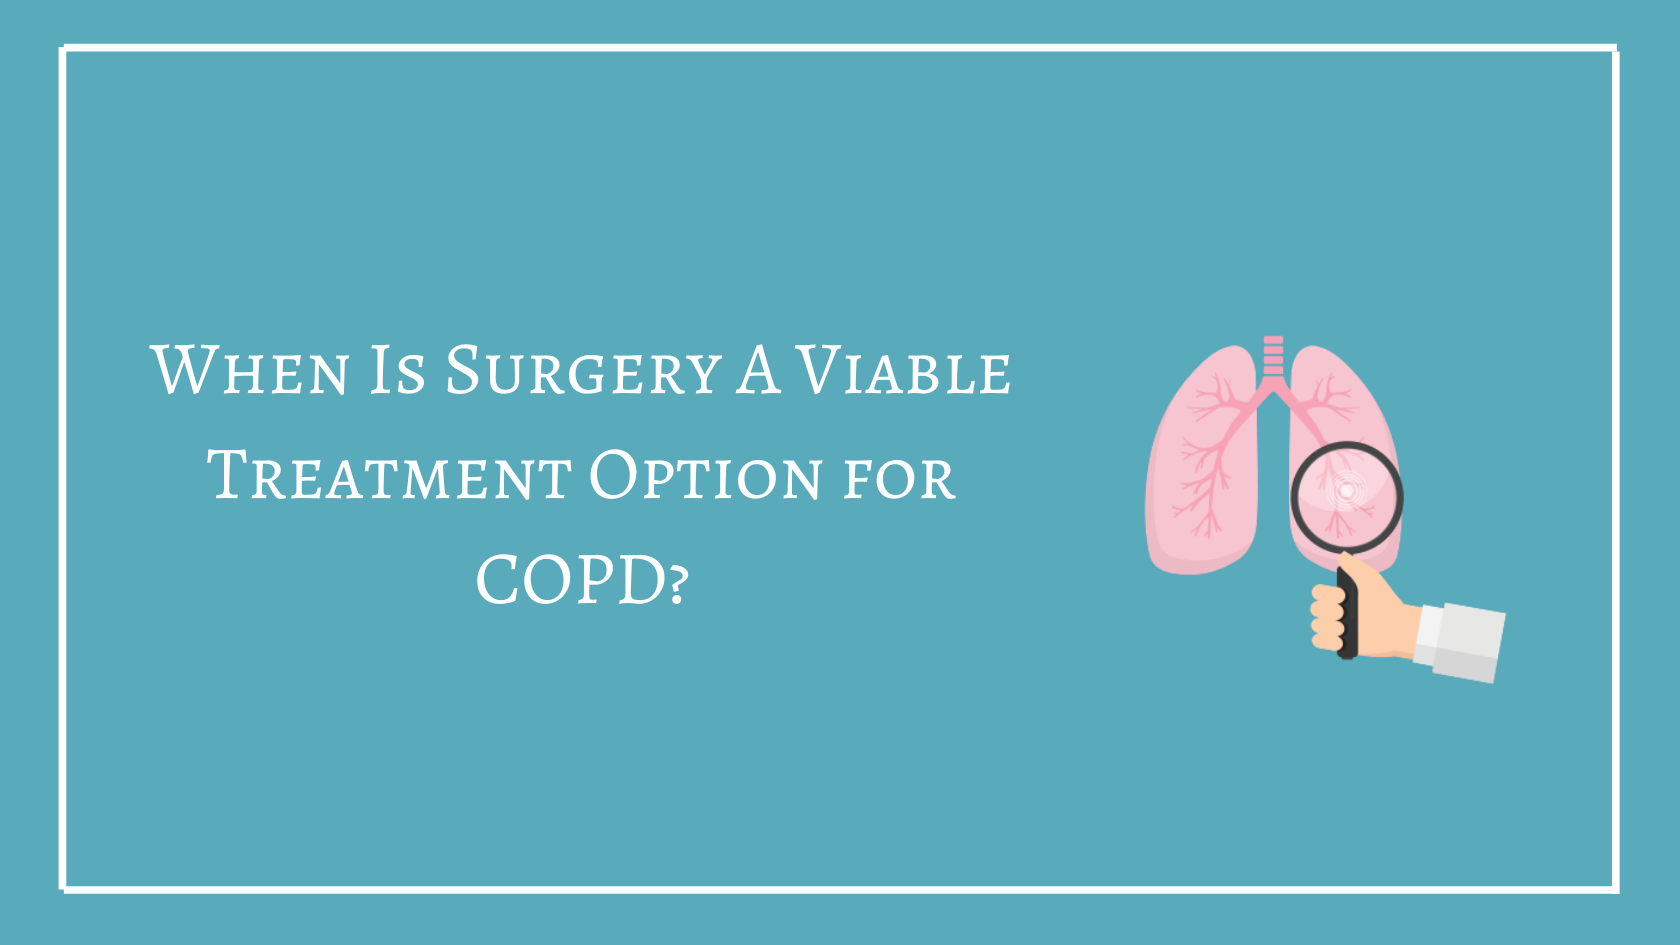 When Is Surgery A Viable Treatment Option For COPD?